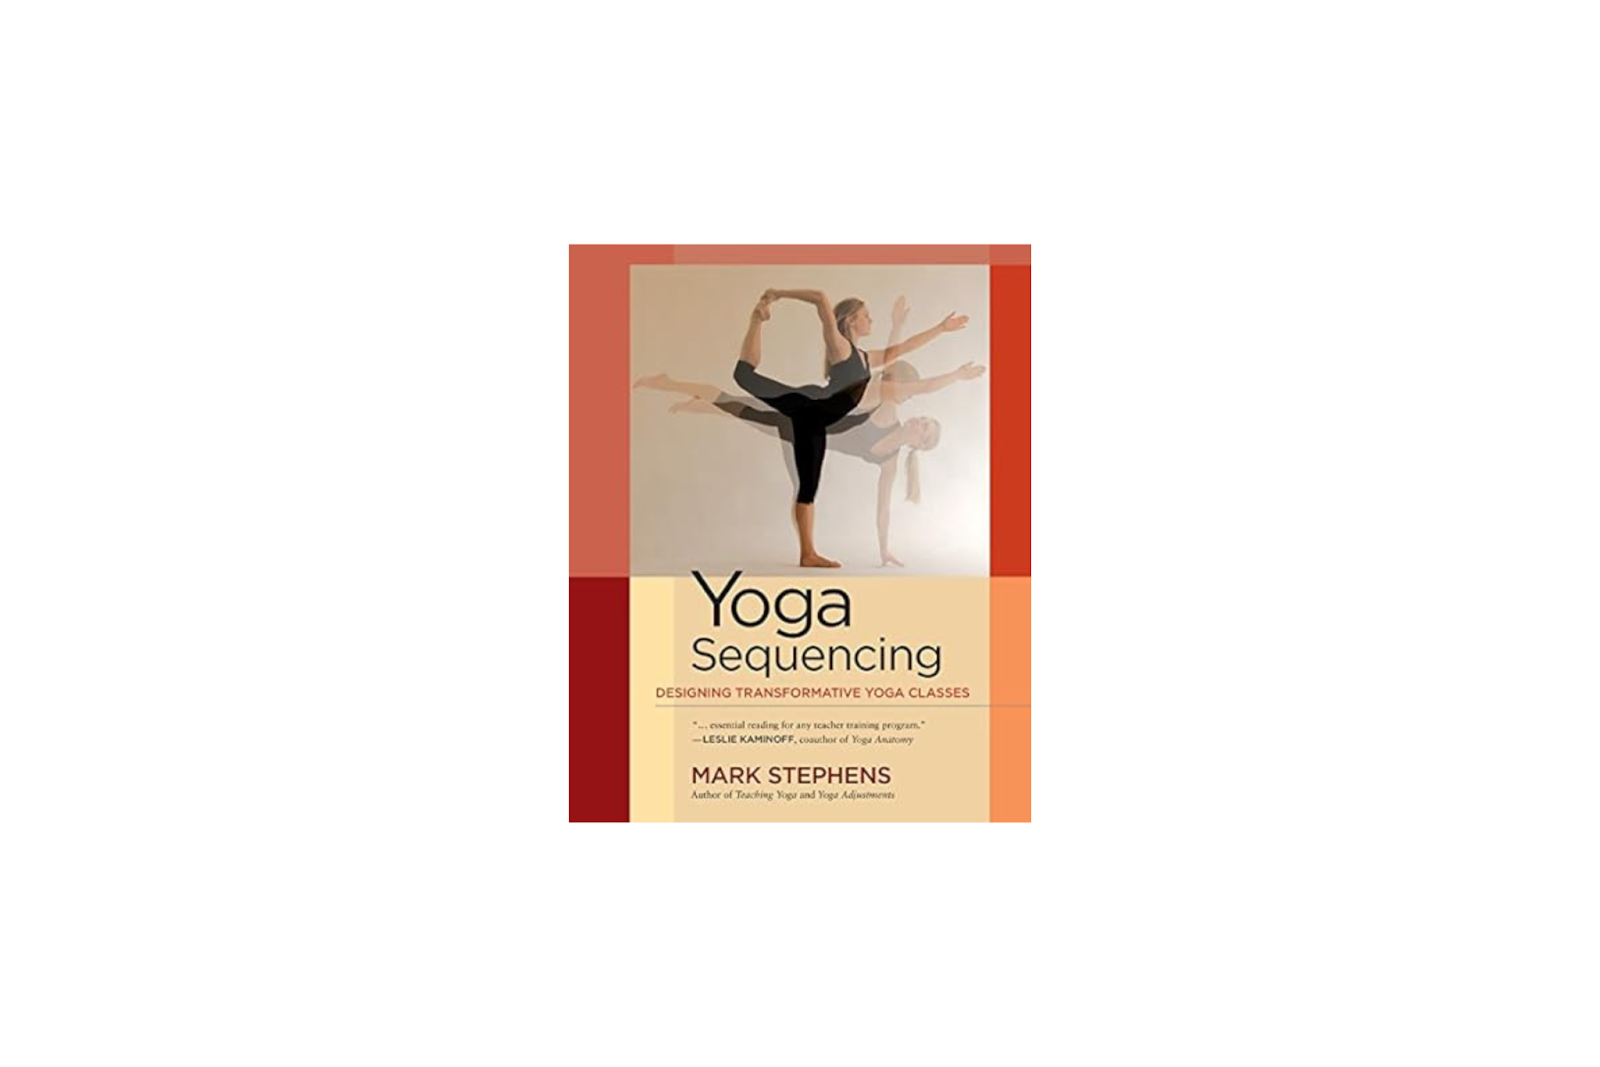  Yoga Sequencing: Designing Transformative Yoga Classes by Mark Stephens